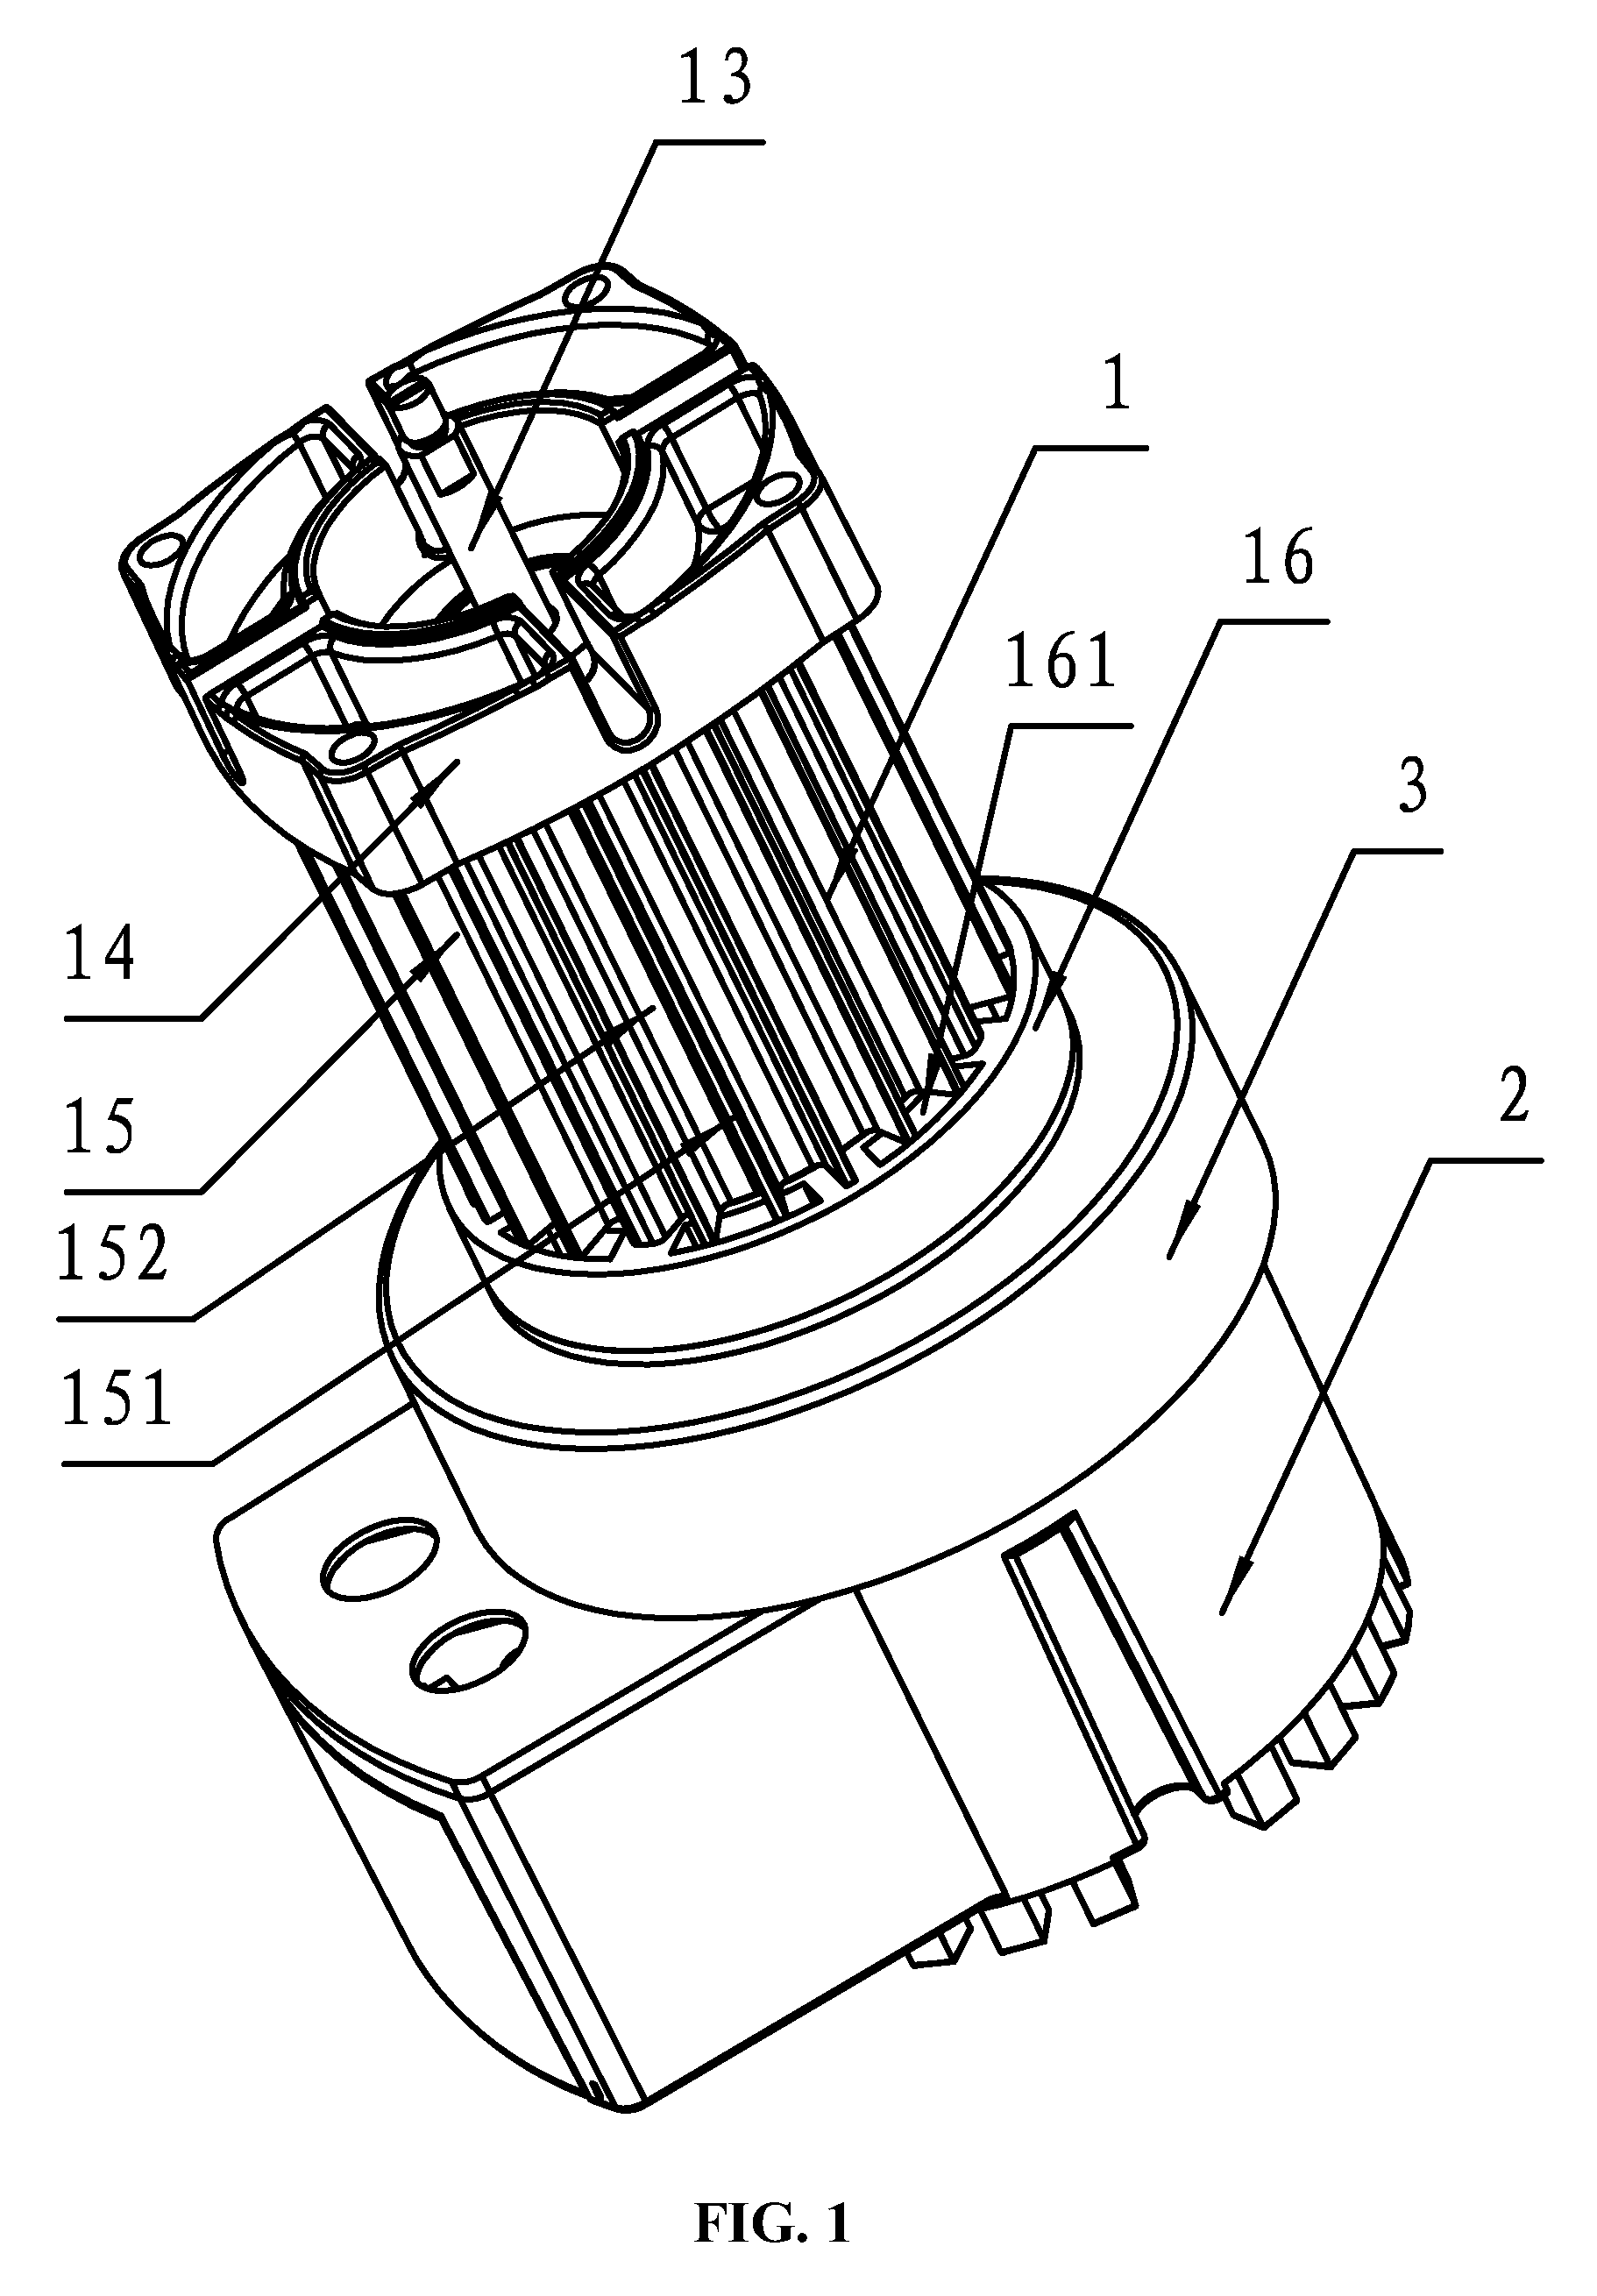 Brushless DC motor structure having a fan radiator for dissipating heat from the motor and the controller